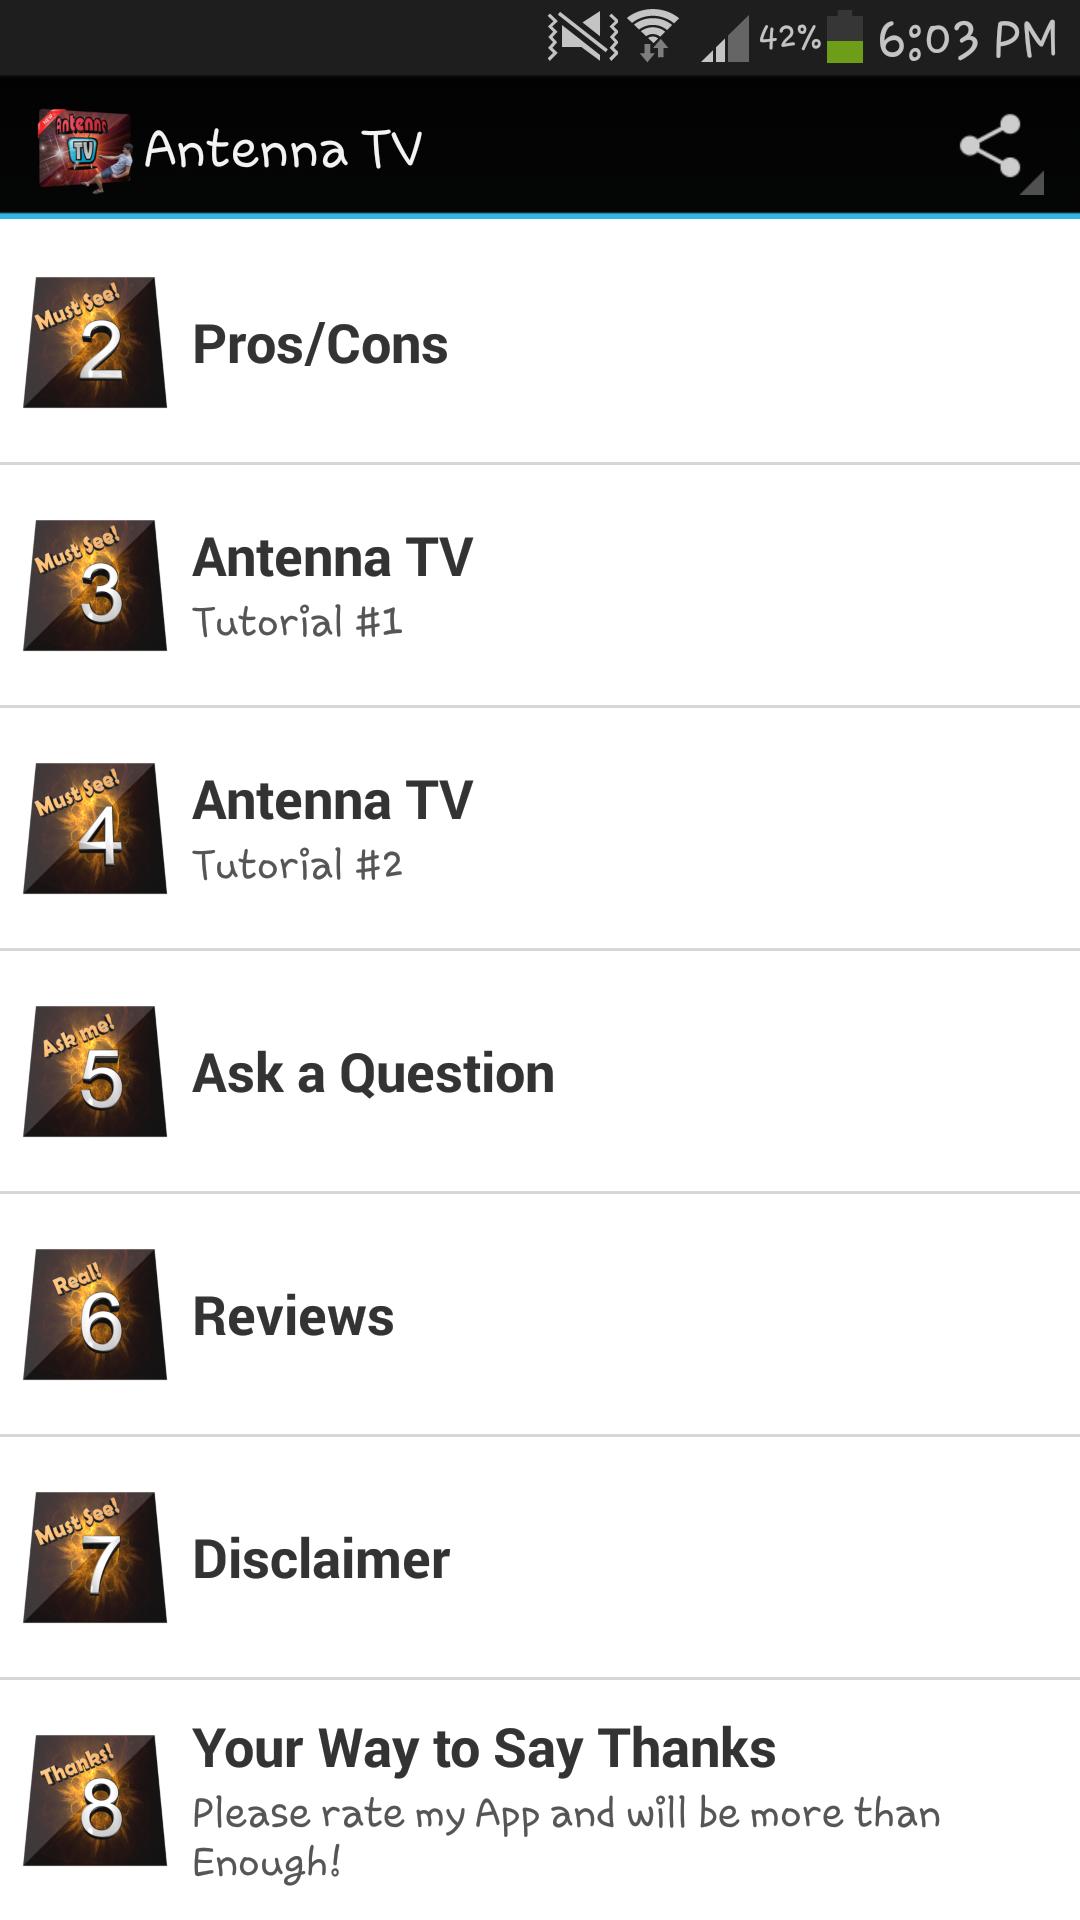 Antenna TV for Android - APK Download